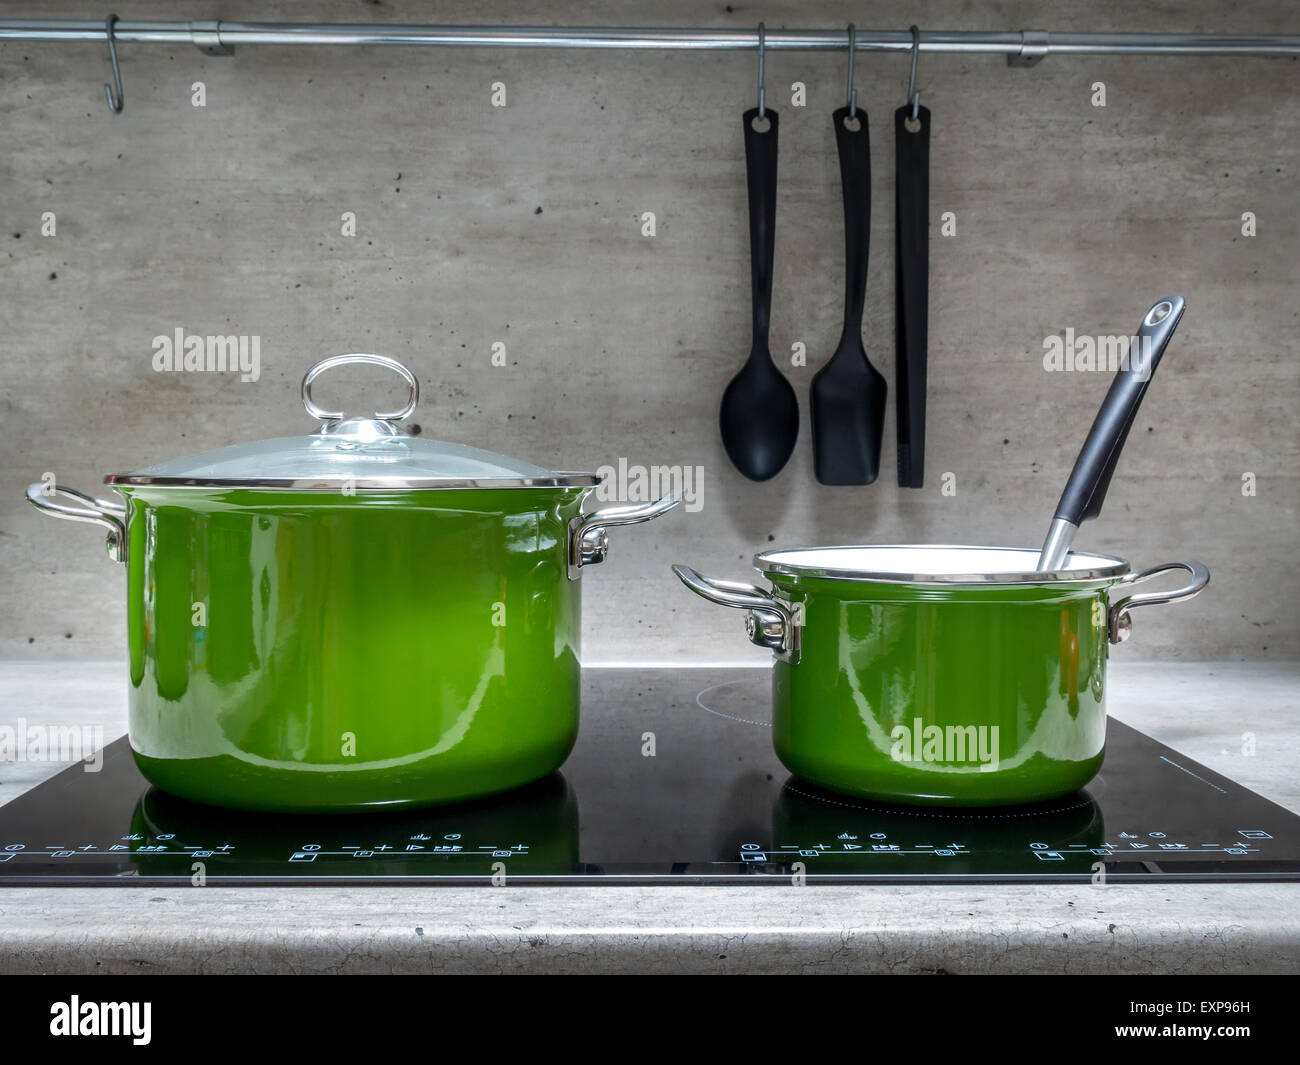 Two green enamel stewpots on black induction cooker Stock Photo